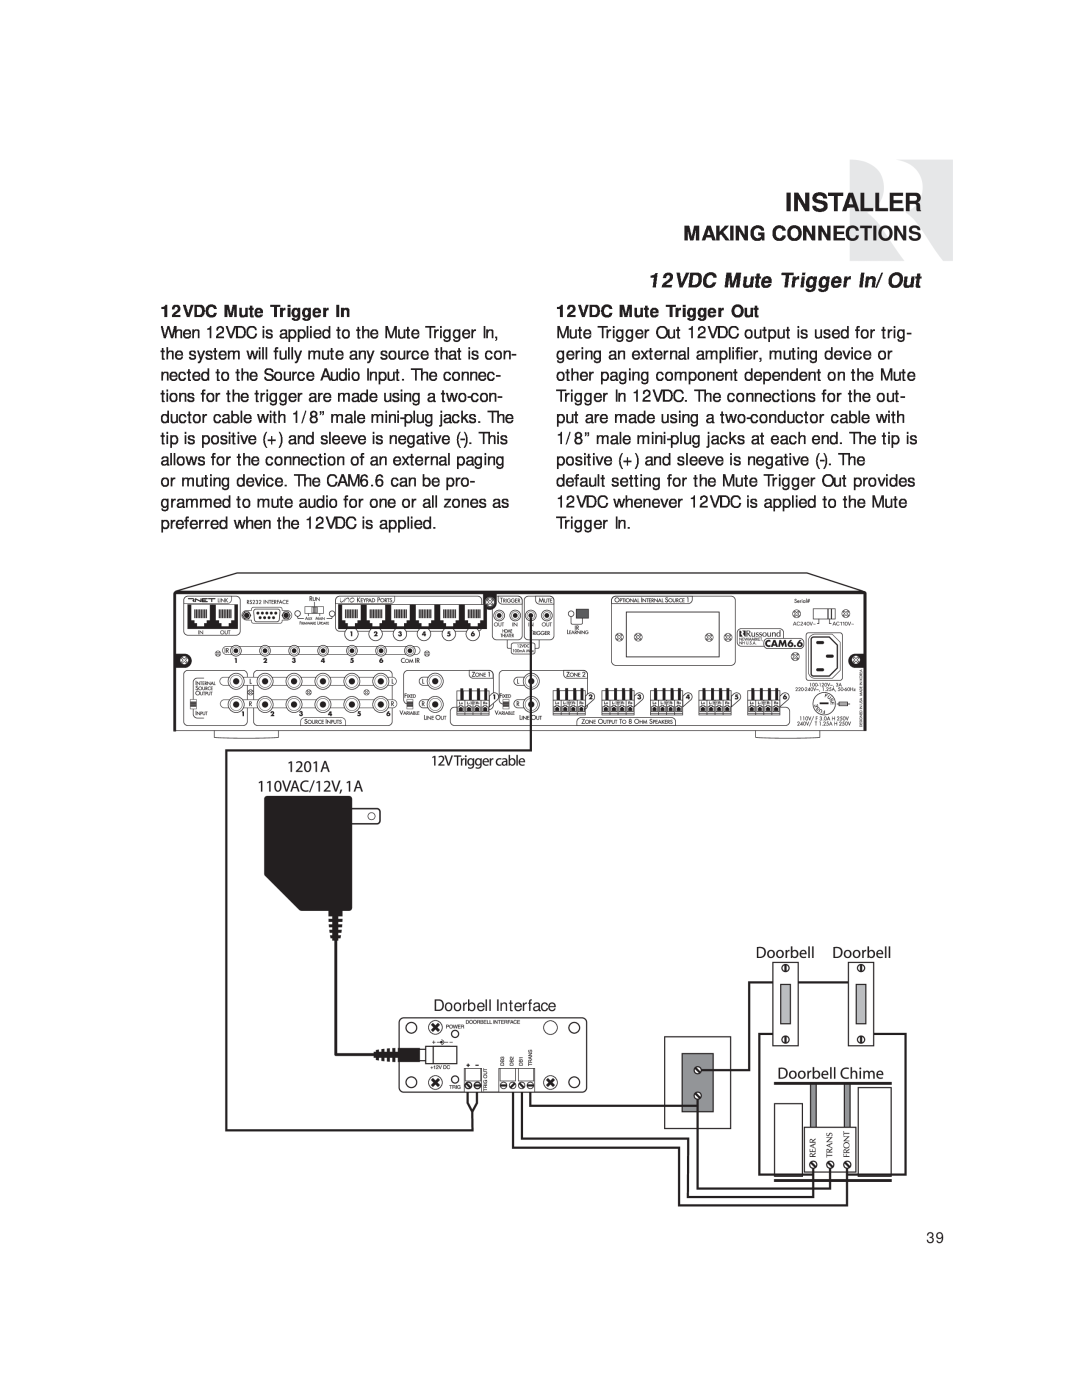 Russound CAM6.6T instruction manual 12VDC Mute Trigger In/Out, 12VDC Mute Trigger Out, Installer, Making Connections 